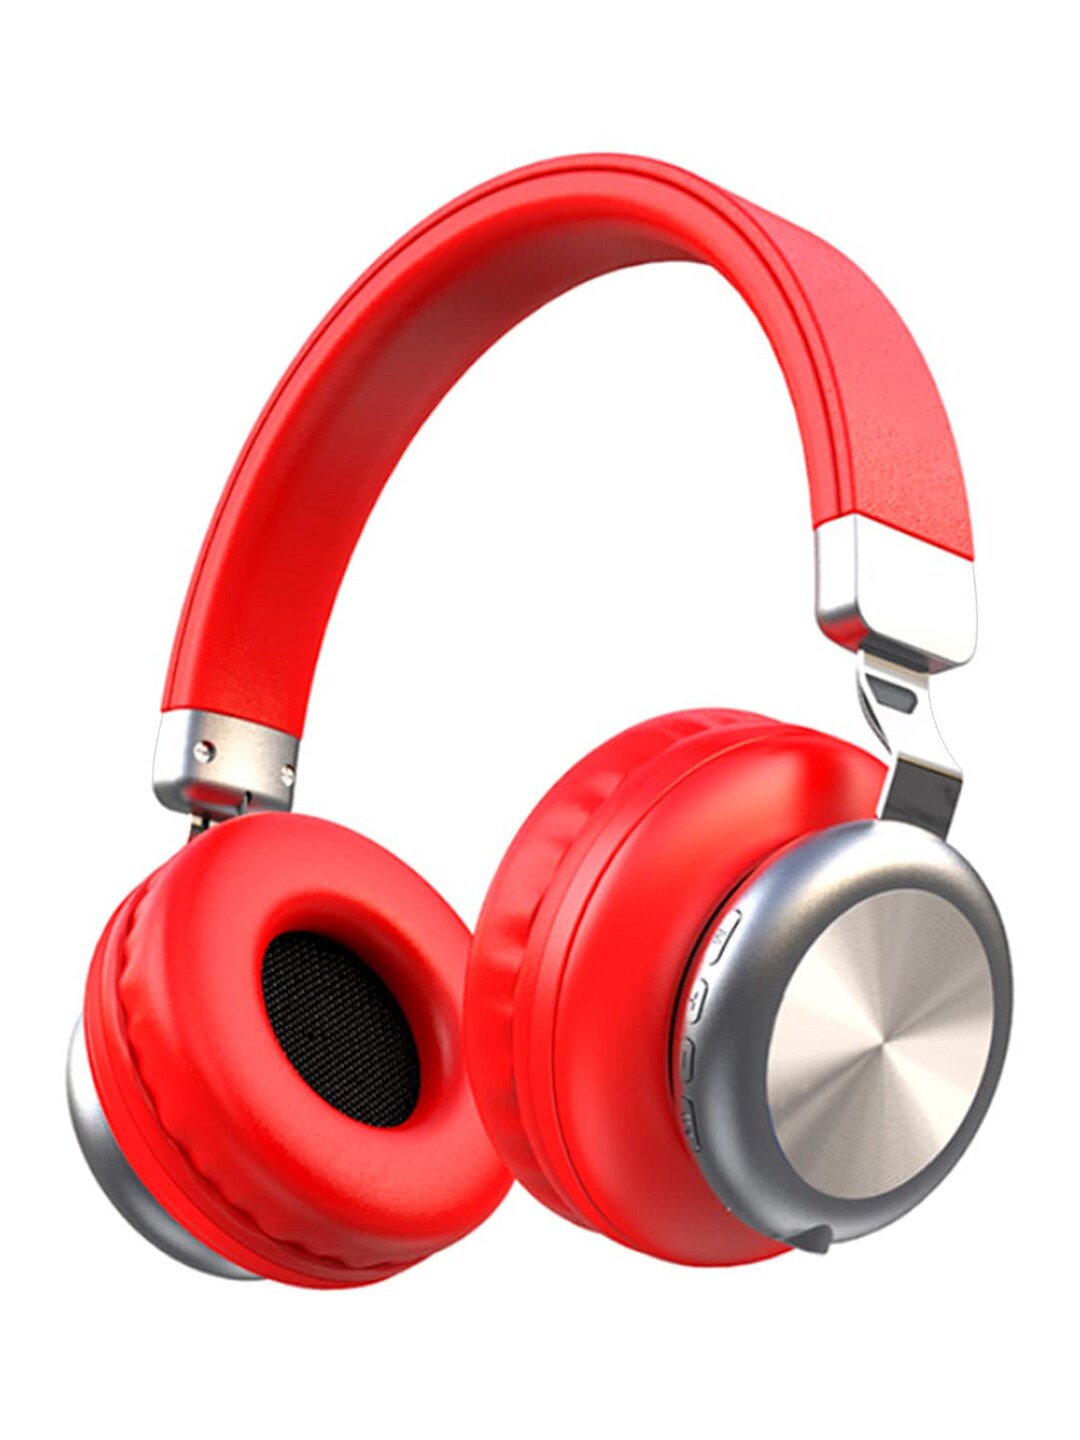 INONE Unisex Red Wireless High Bass 50 mm Dynamic Drivers Headphone Price in India